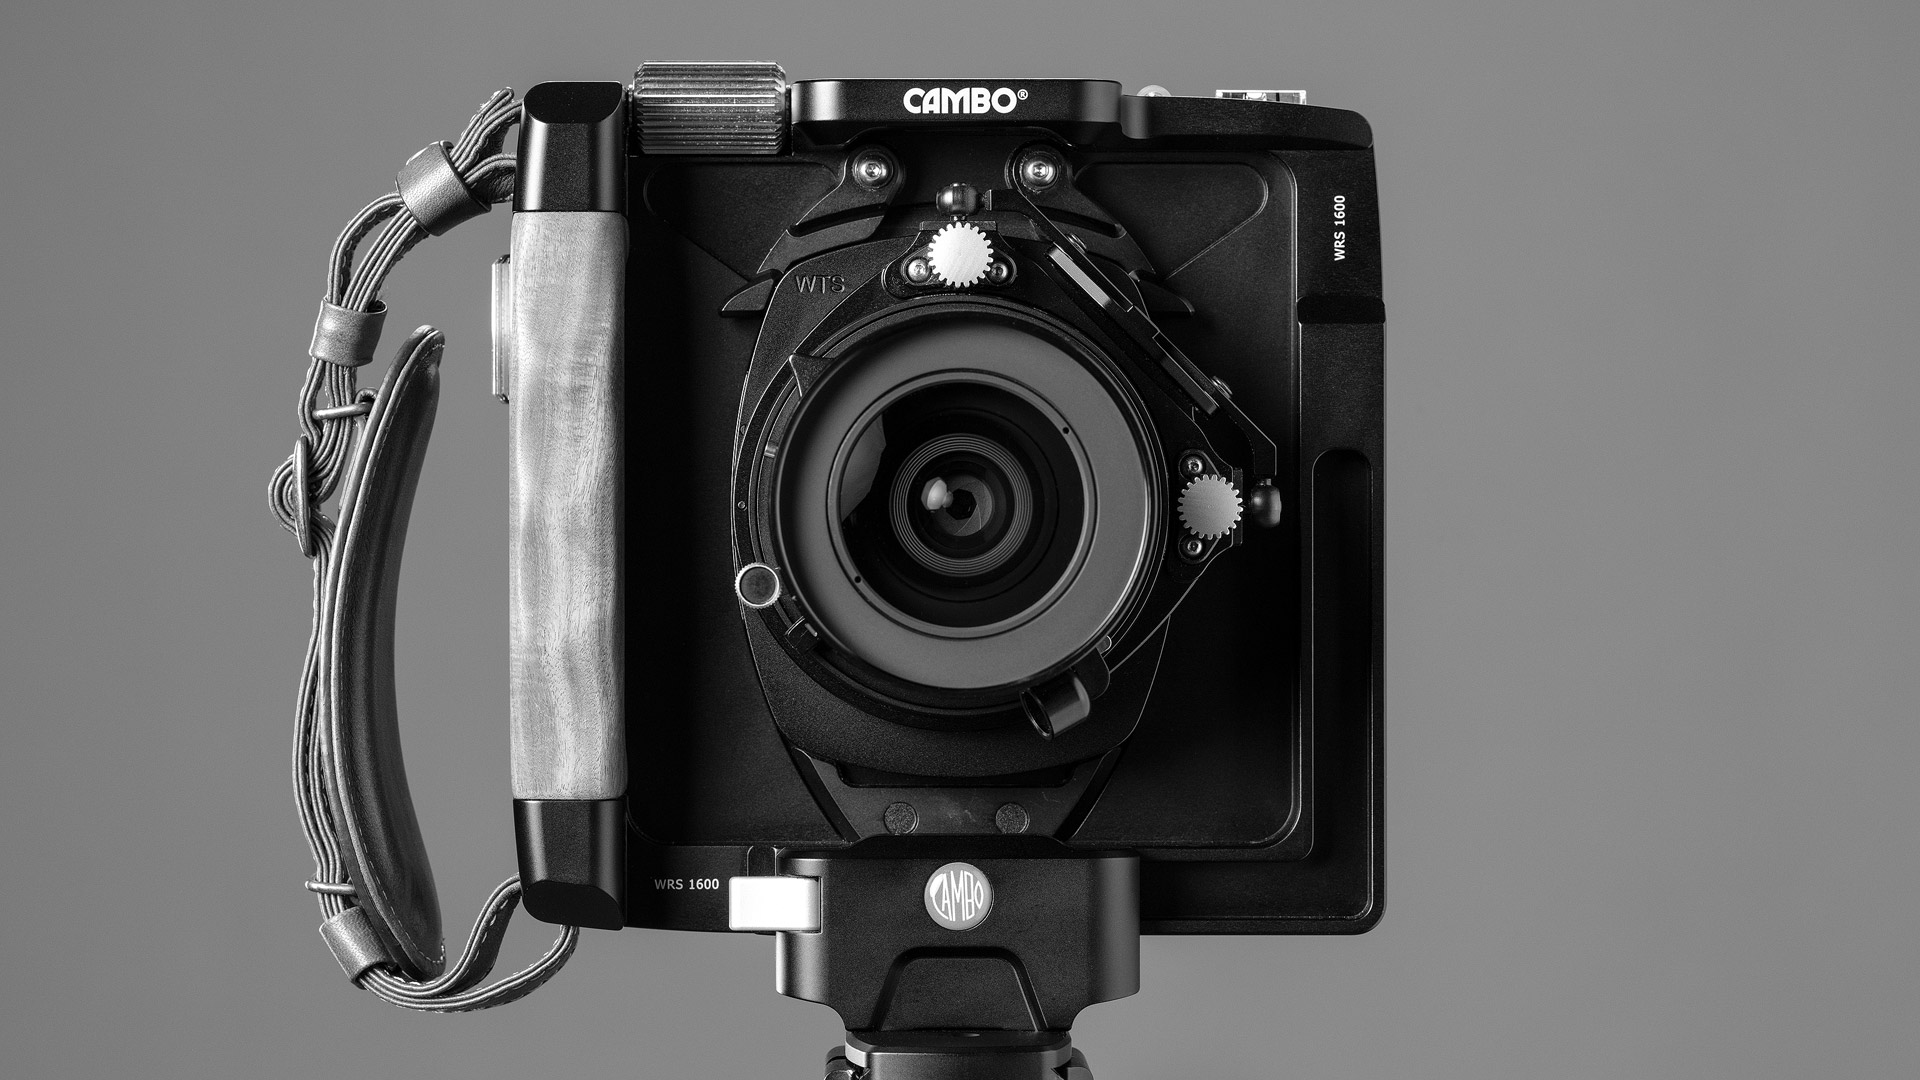 Cambo WRS1600 with Schneider 60XL APO-Digitar Lens - Diggles Photography